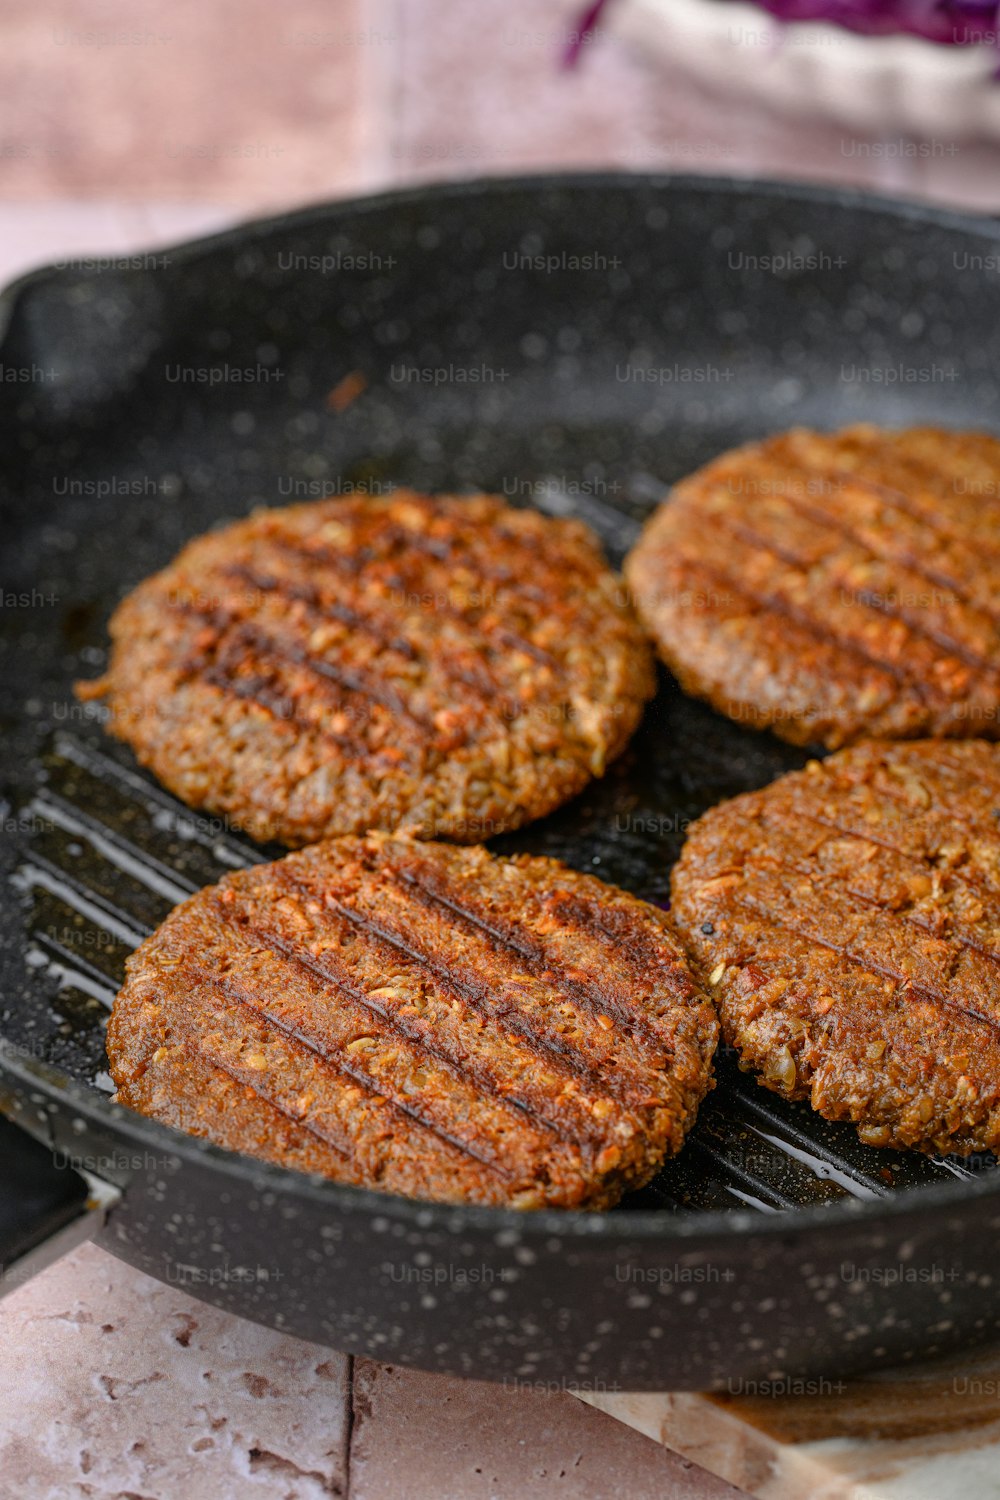 four hamburger patties cooking in a frying pan